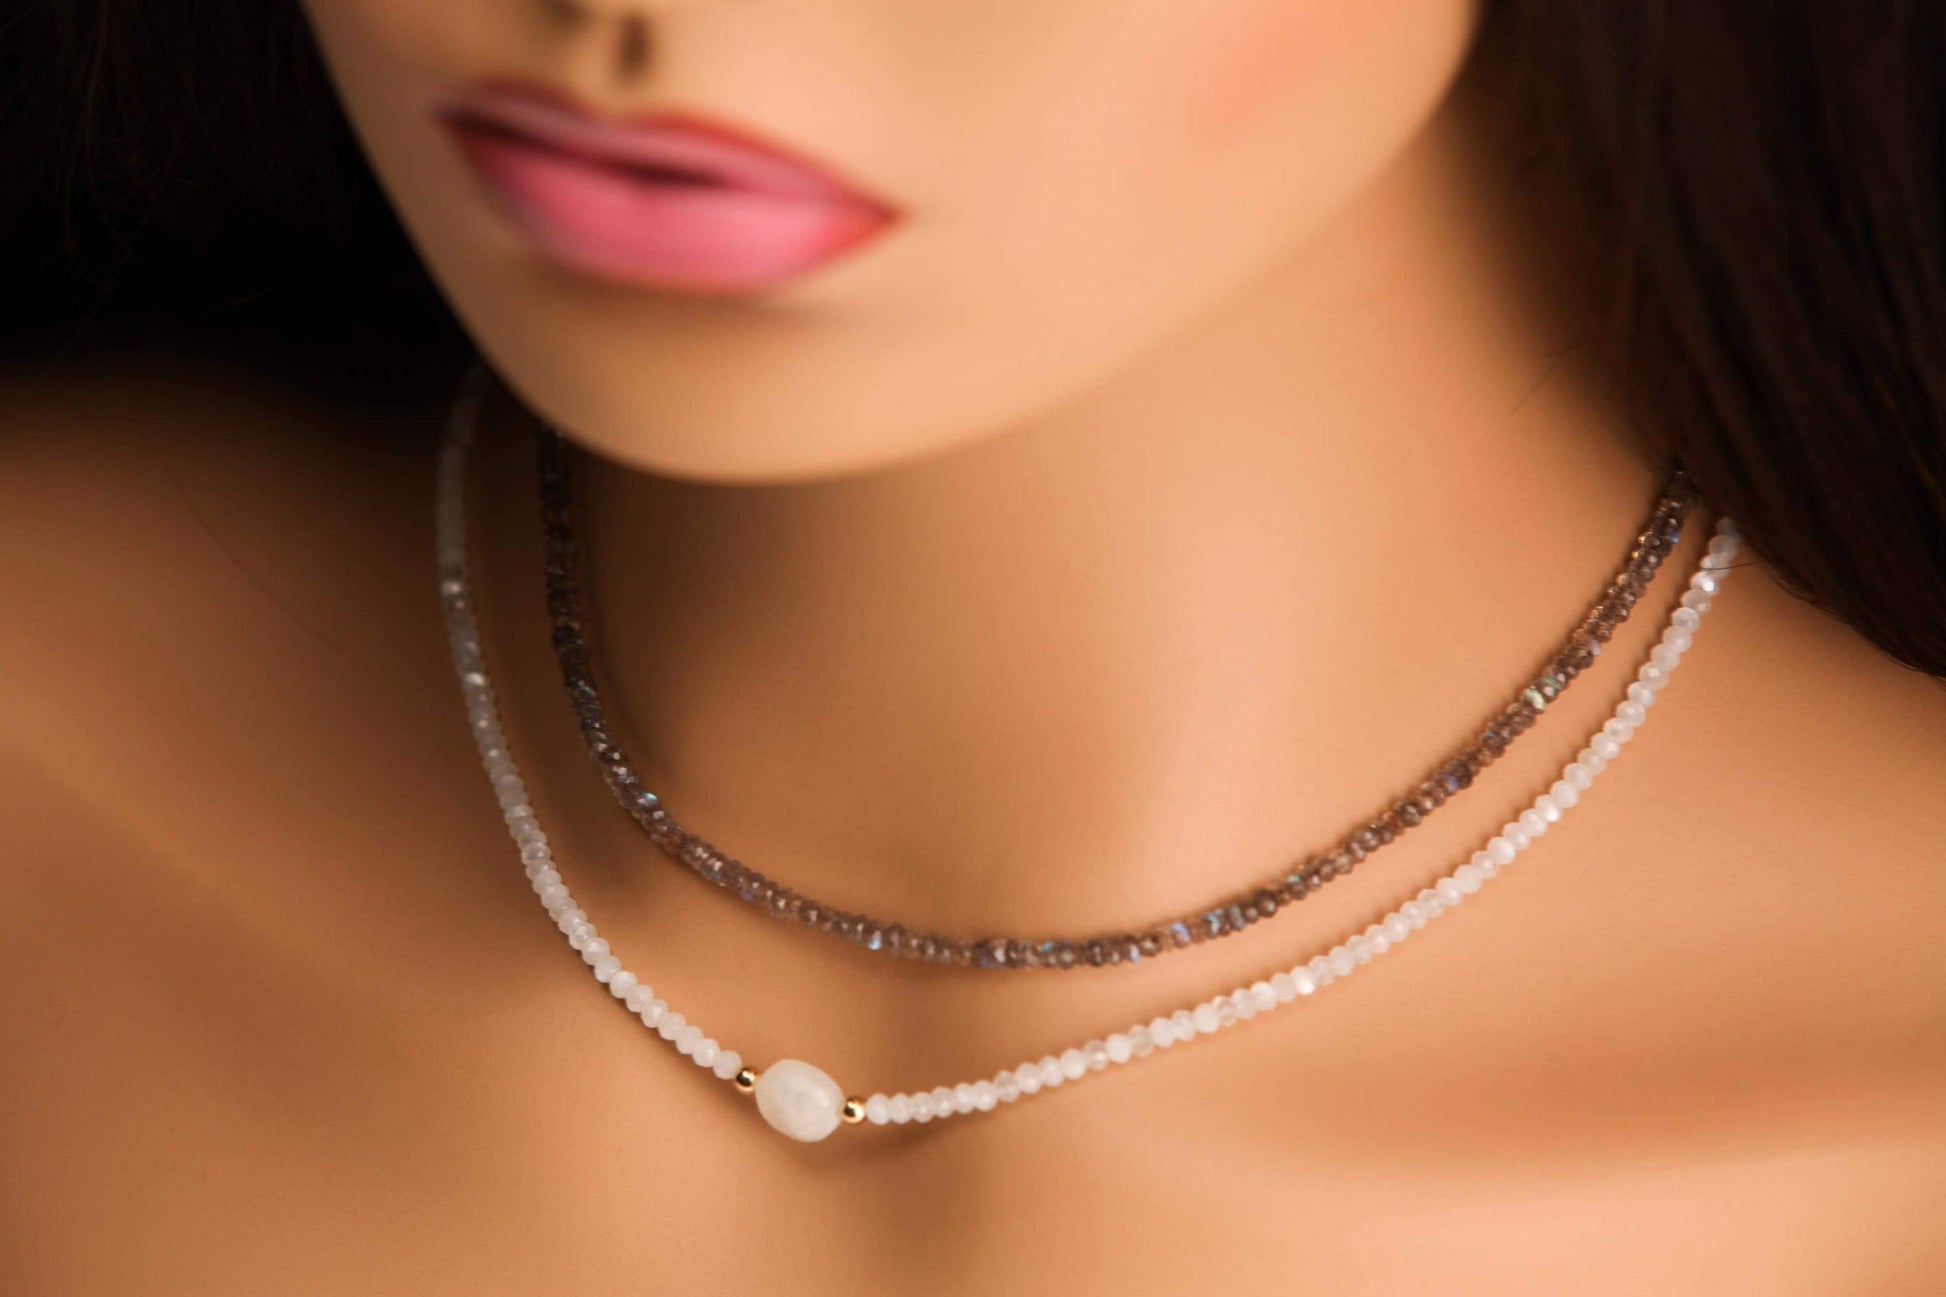 Moonstone Faceted 3- 3.5mm Rondelle with 10mm moonstone dime Front Choker layering Necklace in 14k Gold Filled ,Birthday, yoga ,healing